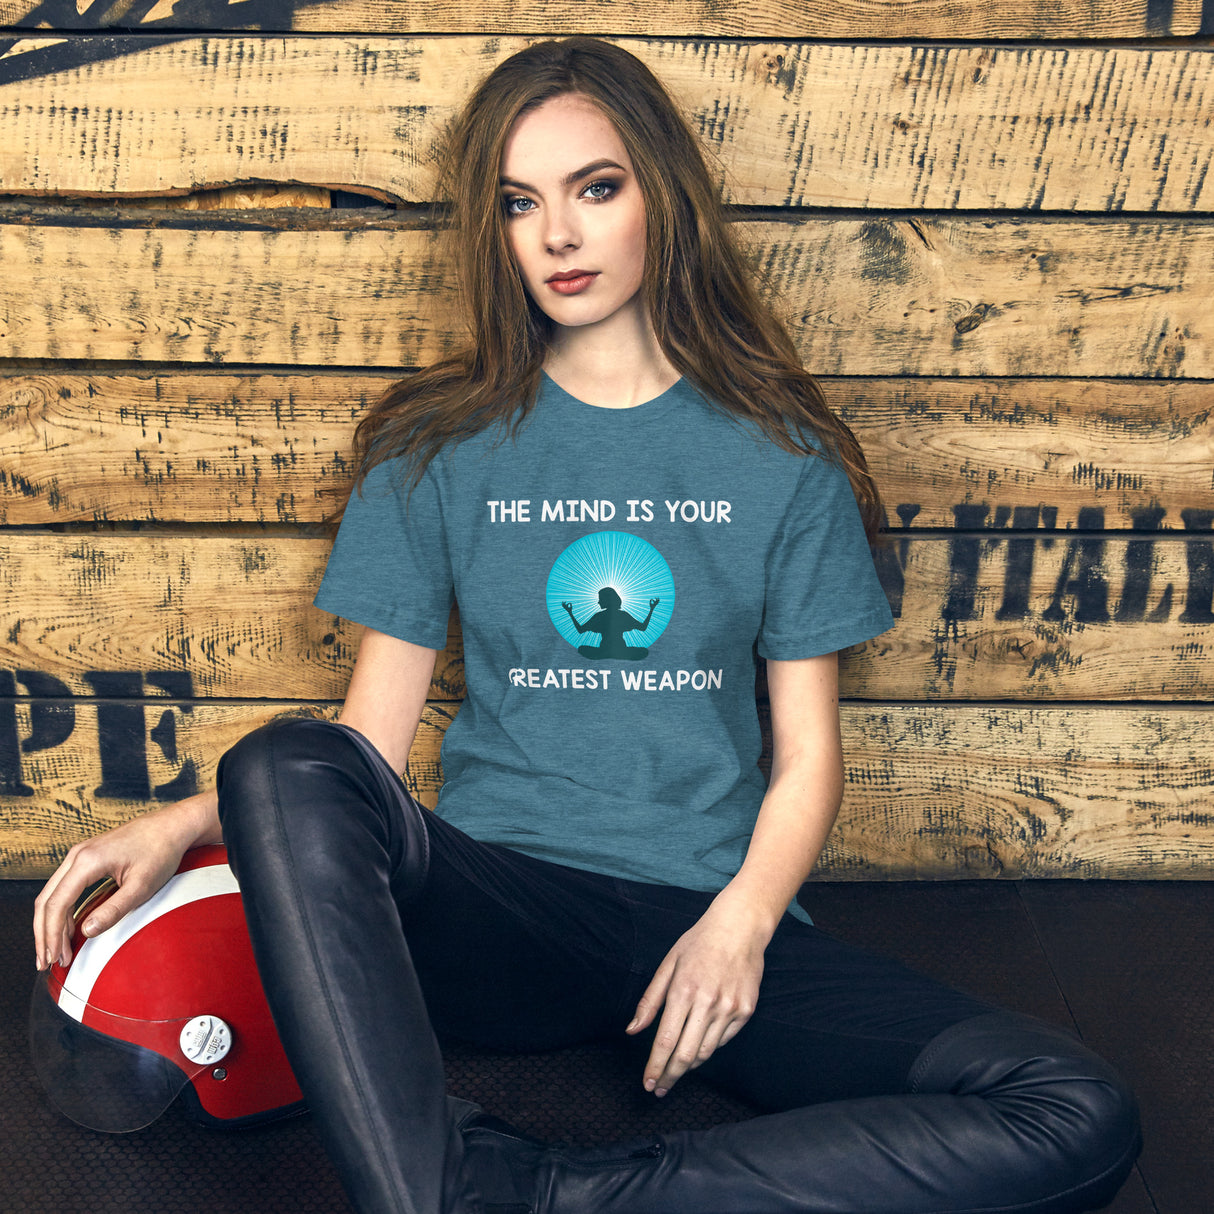 The Mind Is Your Greatest Weapon Women's Shirt